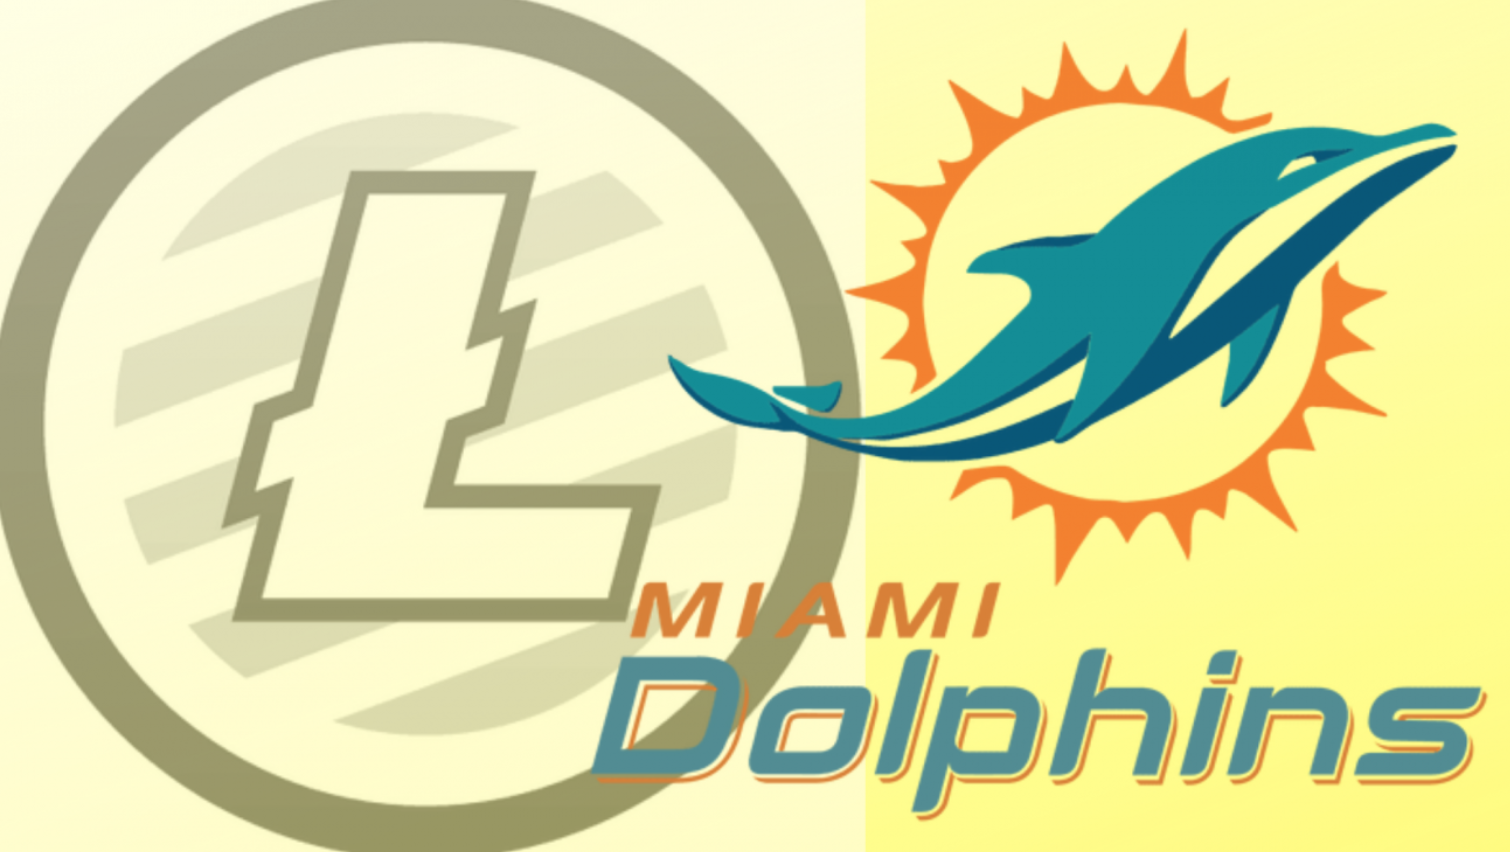 The Miami Dolphins Now Accept Bitcoin And Litecoin Crypt-Currency Payments (#GotBitcoin?)